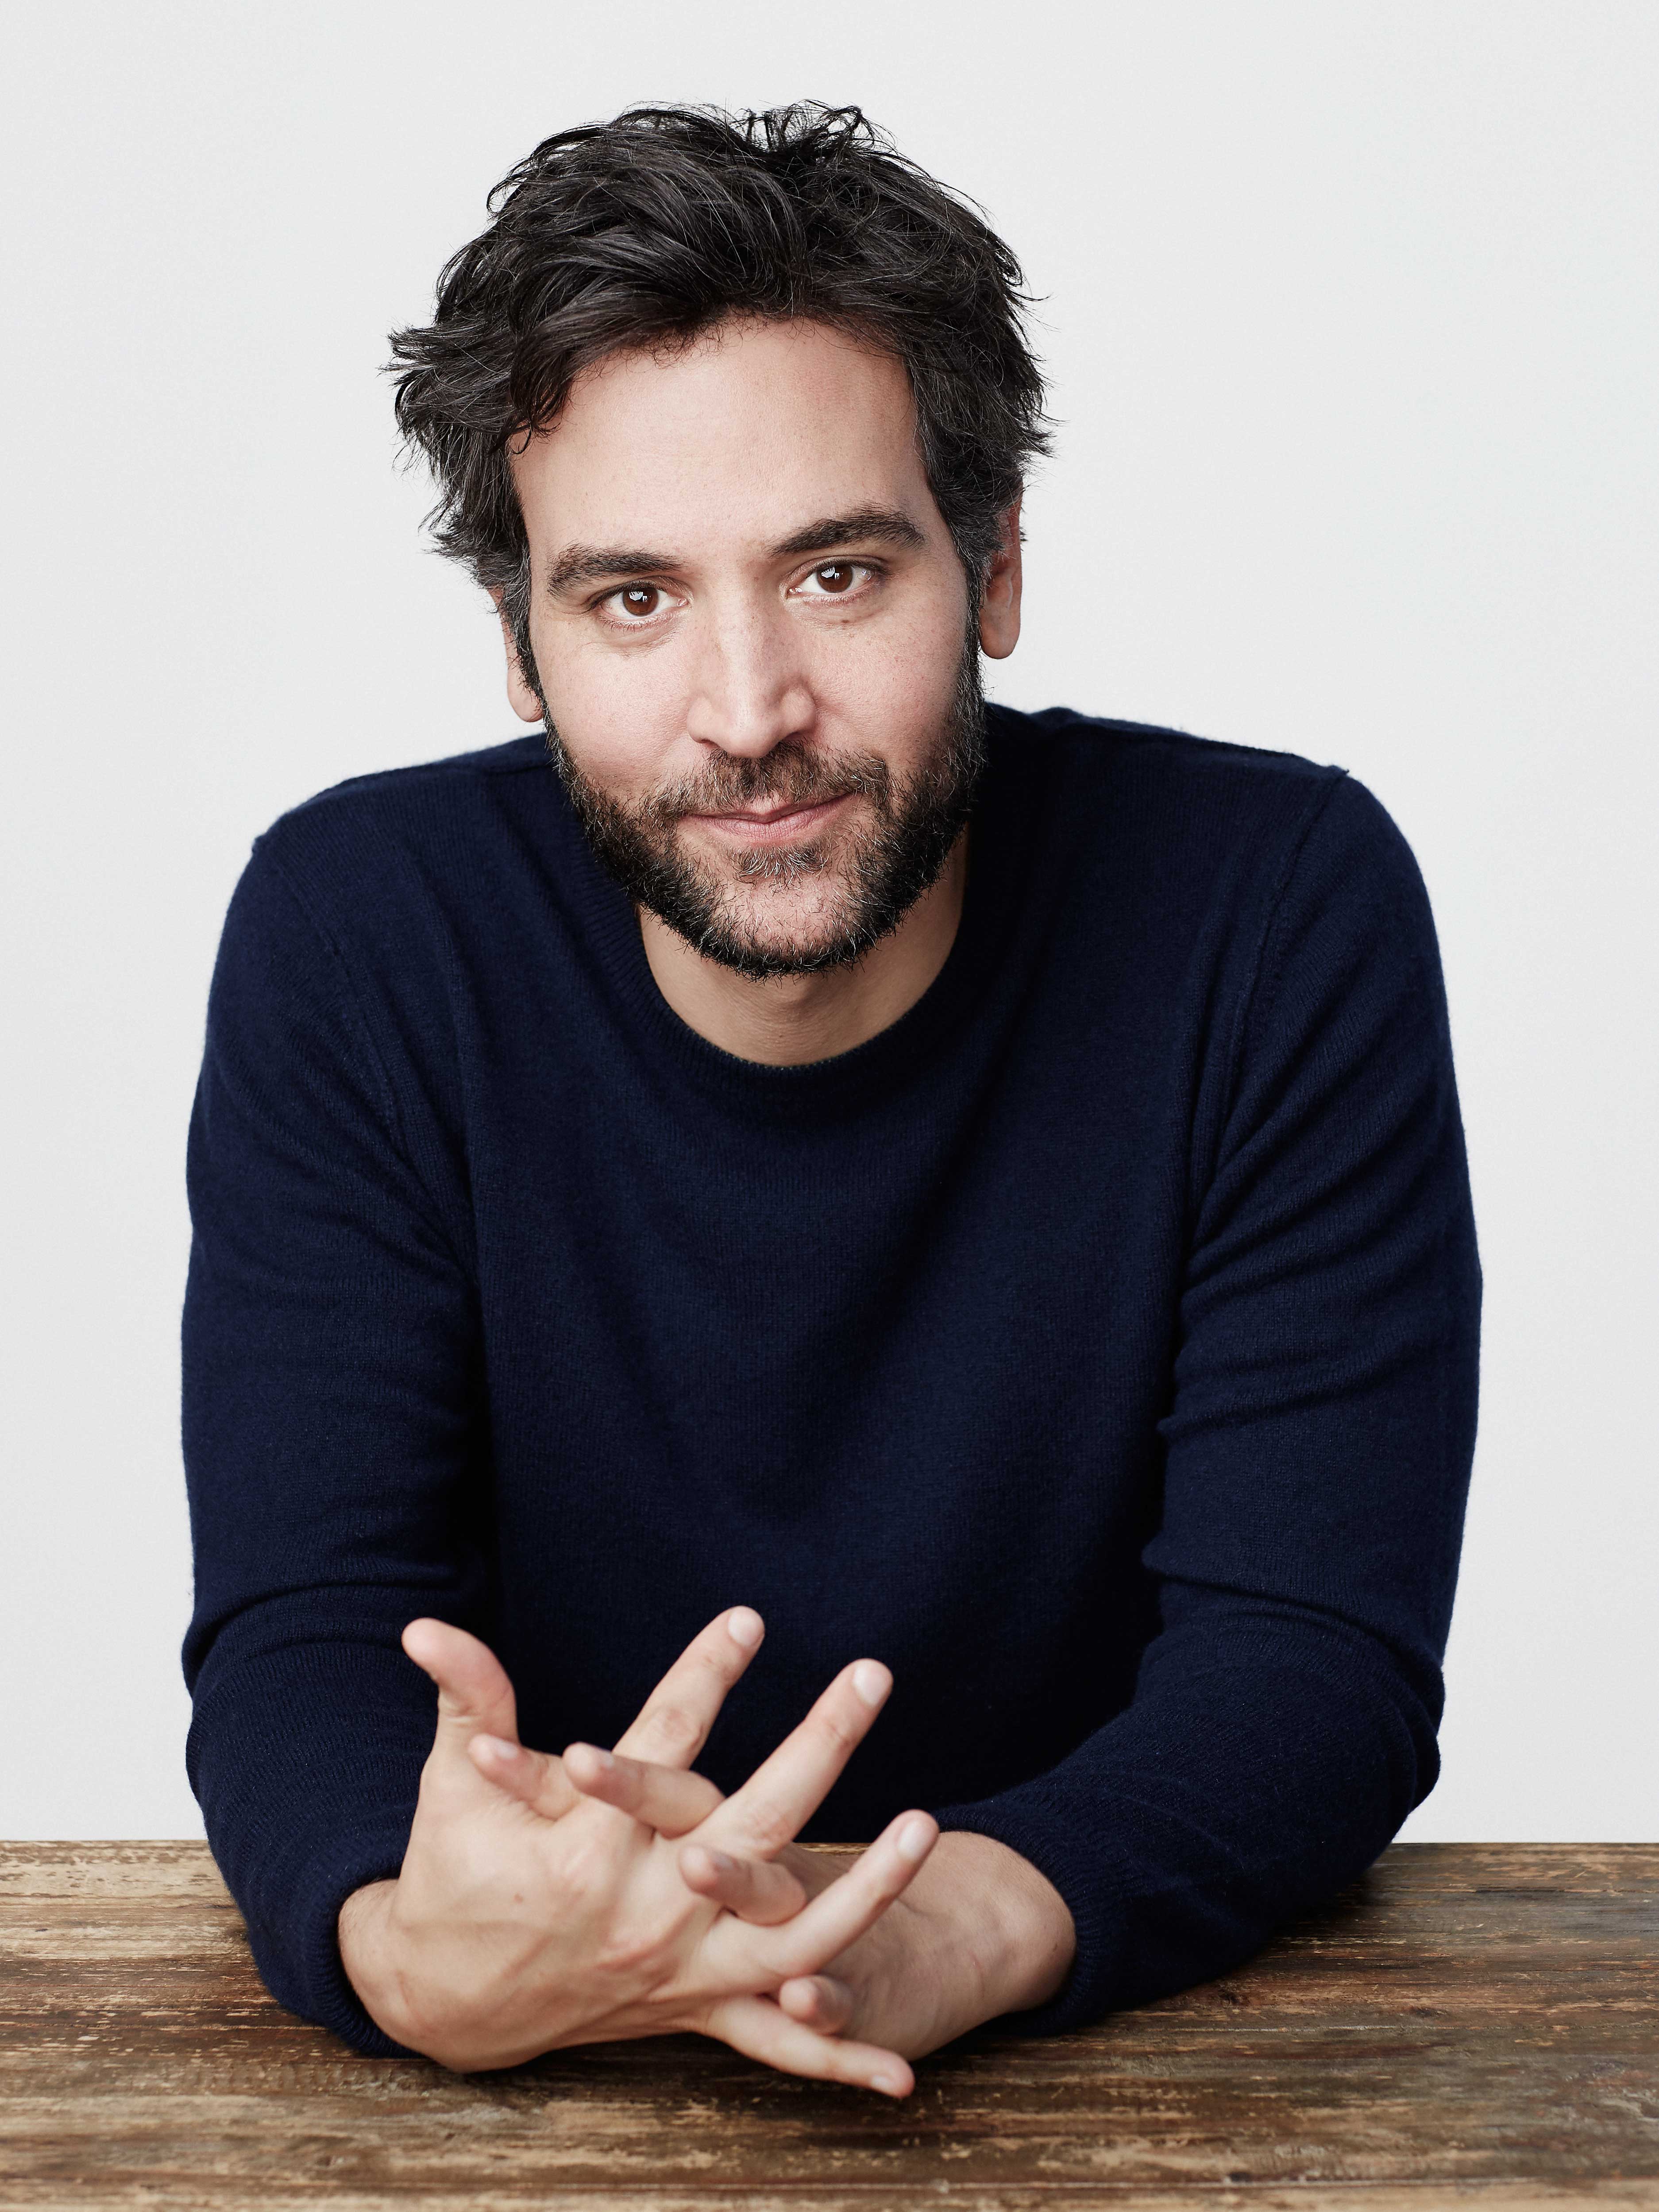 UPC Nebraska is pleased to offer a UNL-student exclusive Zoom session with actor, filmmaker, author and musician Josh Radnor on Friday, April 9, 2021 at 7:30 p.m.